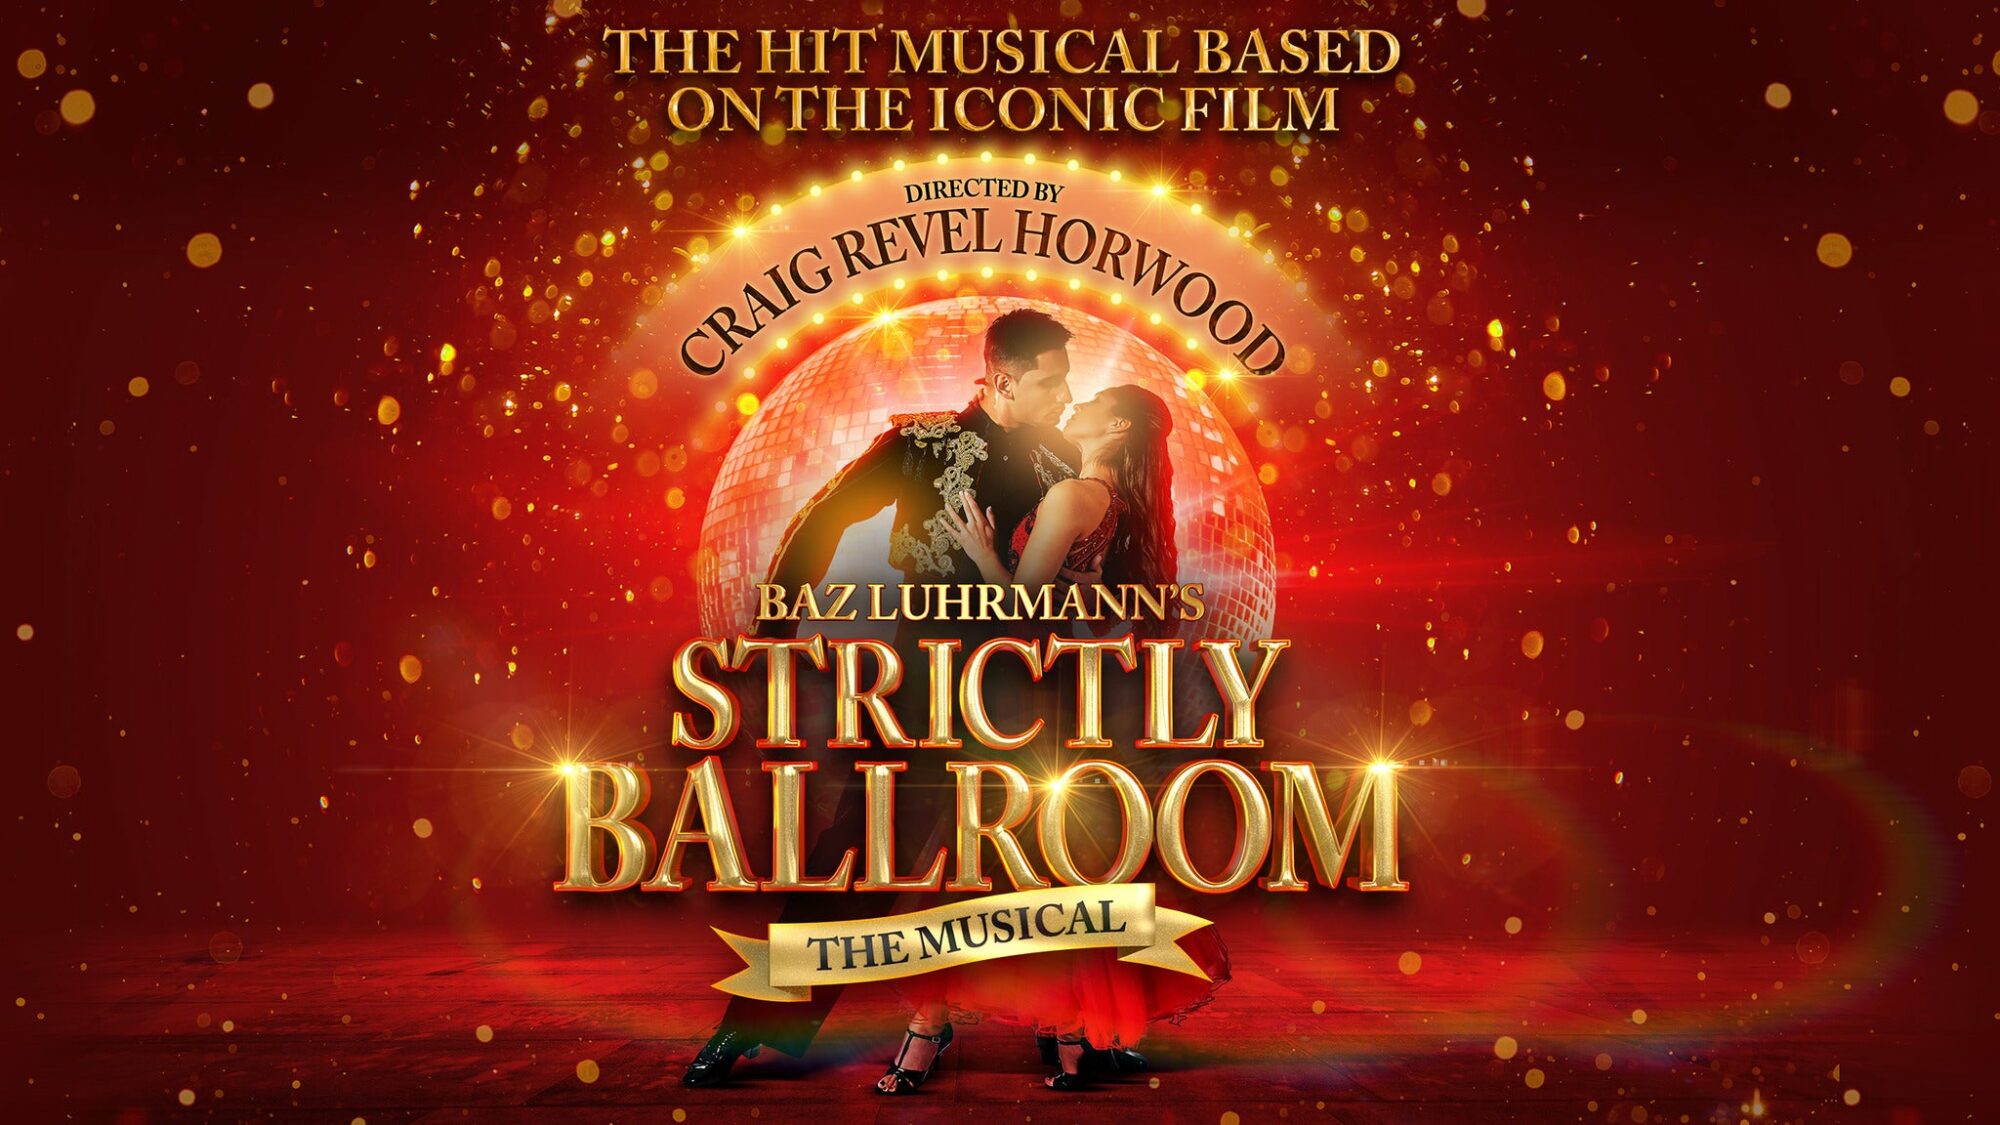 Image name Strictly Ballroom The Musical at Hull New Theatre Hull the 32 image from the post Events in Yorkshire.com.